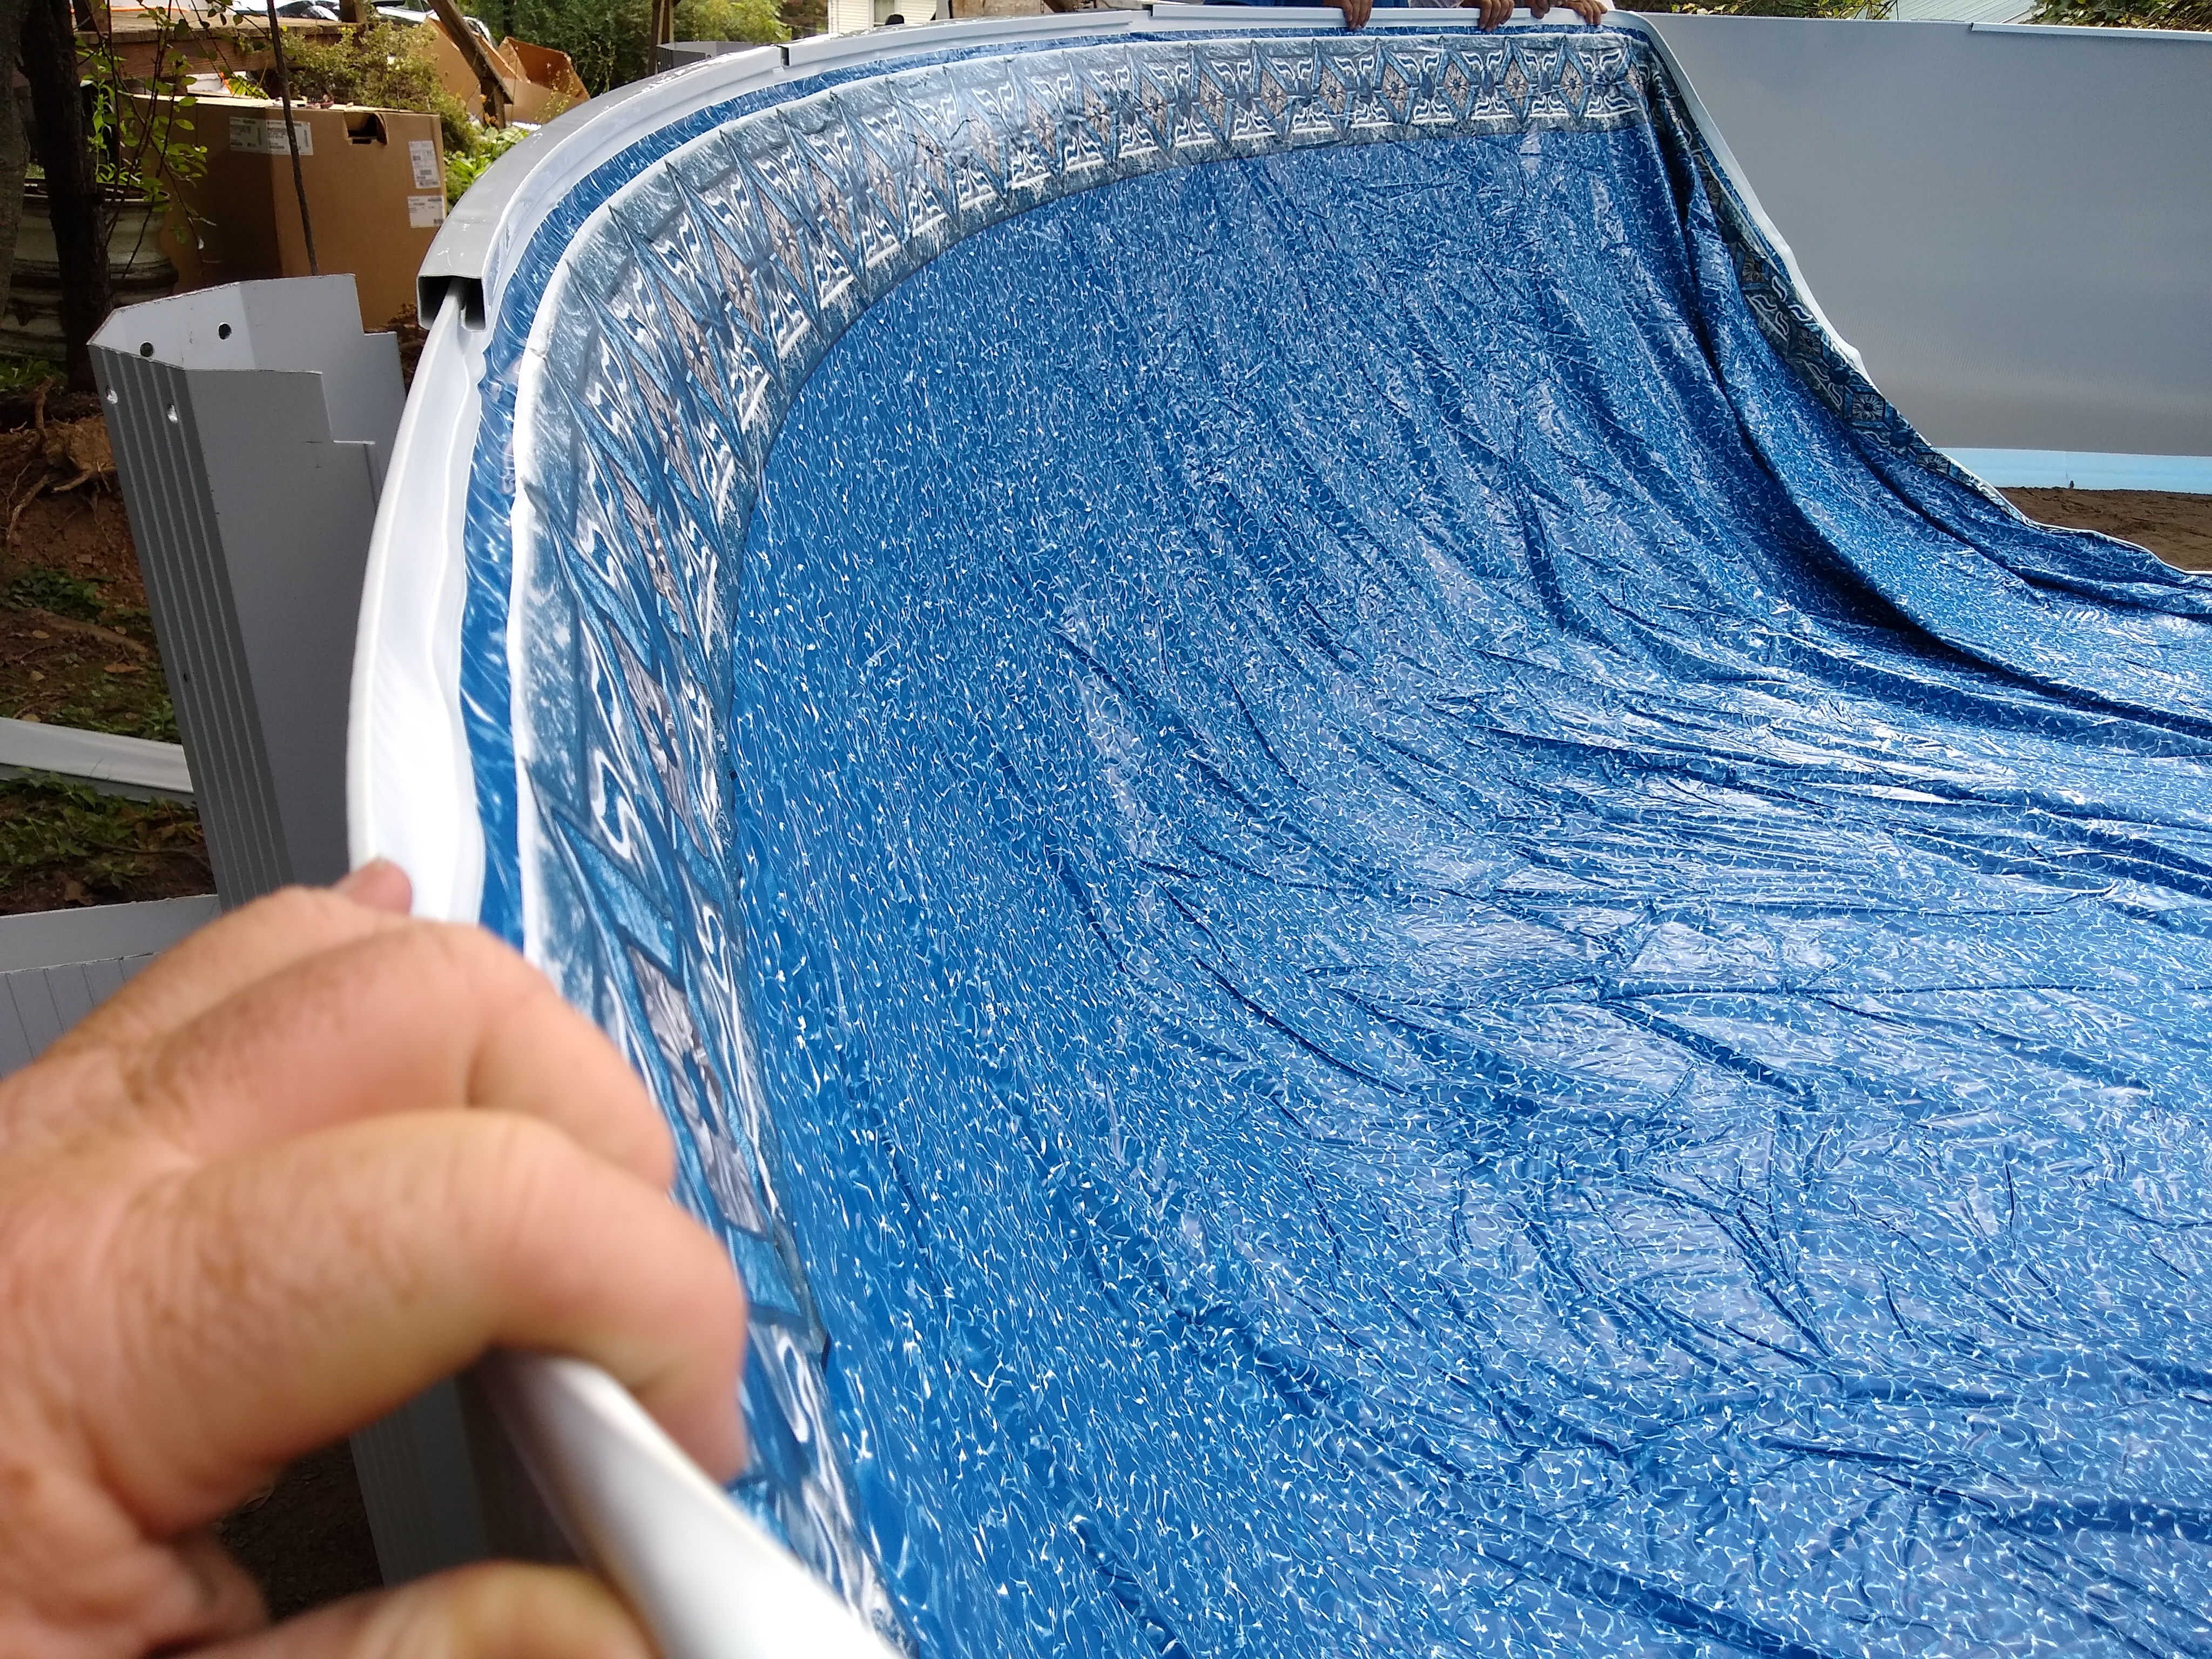 POOL REPAIRS, LINER CHANGES and MORE